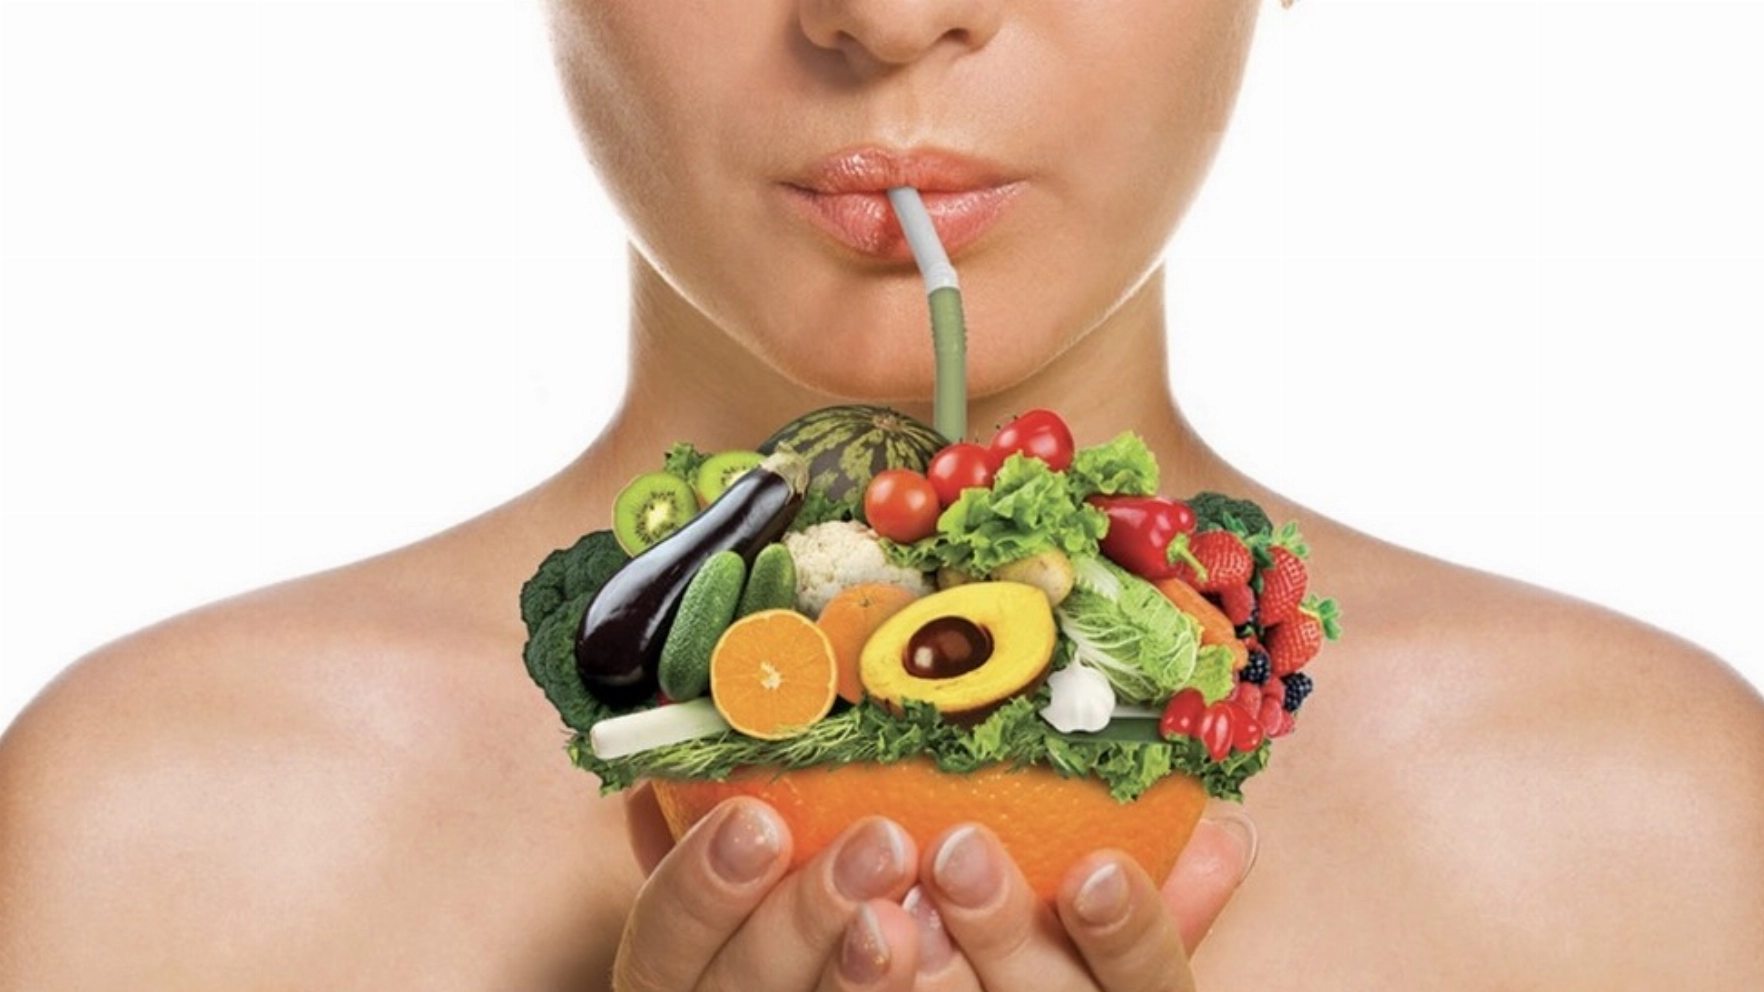 Your diet influences your skin health